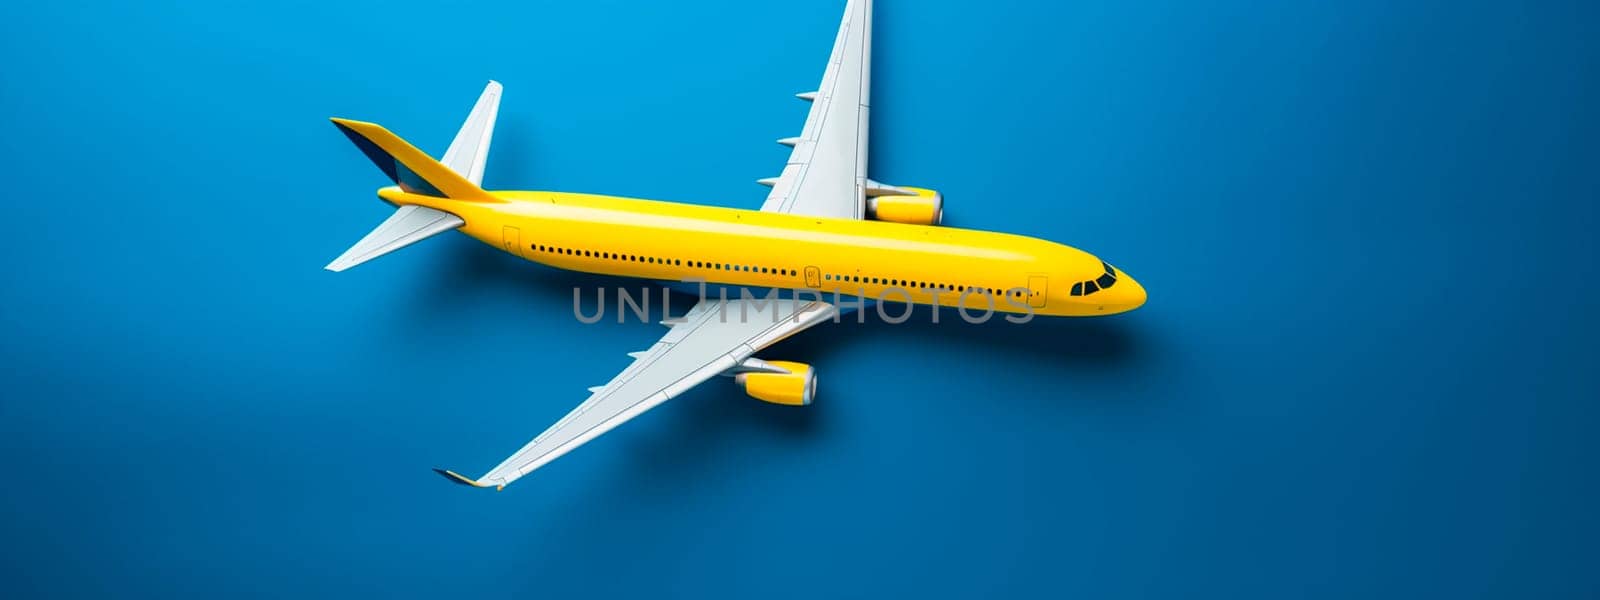 An airplane on a blue and yellow map background. Selective focus. Ukraine.